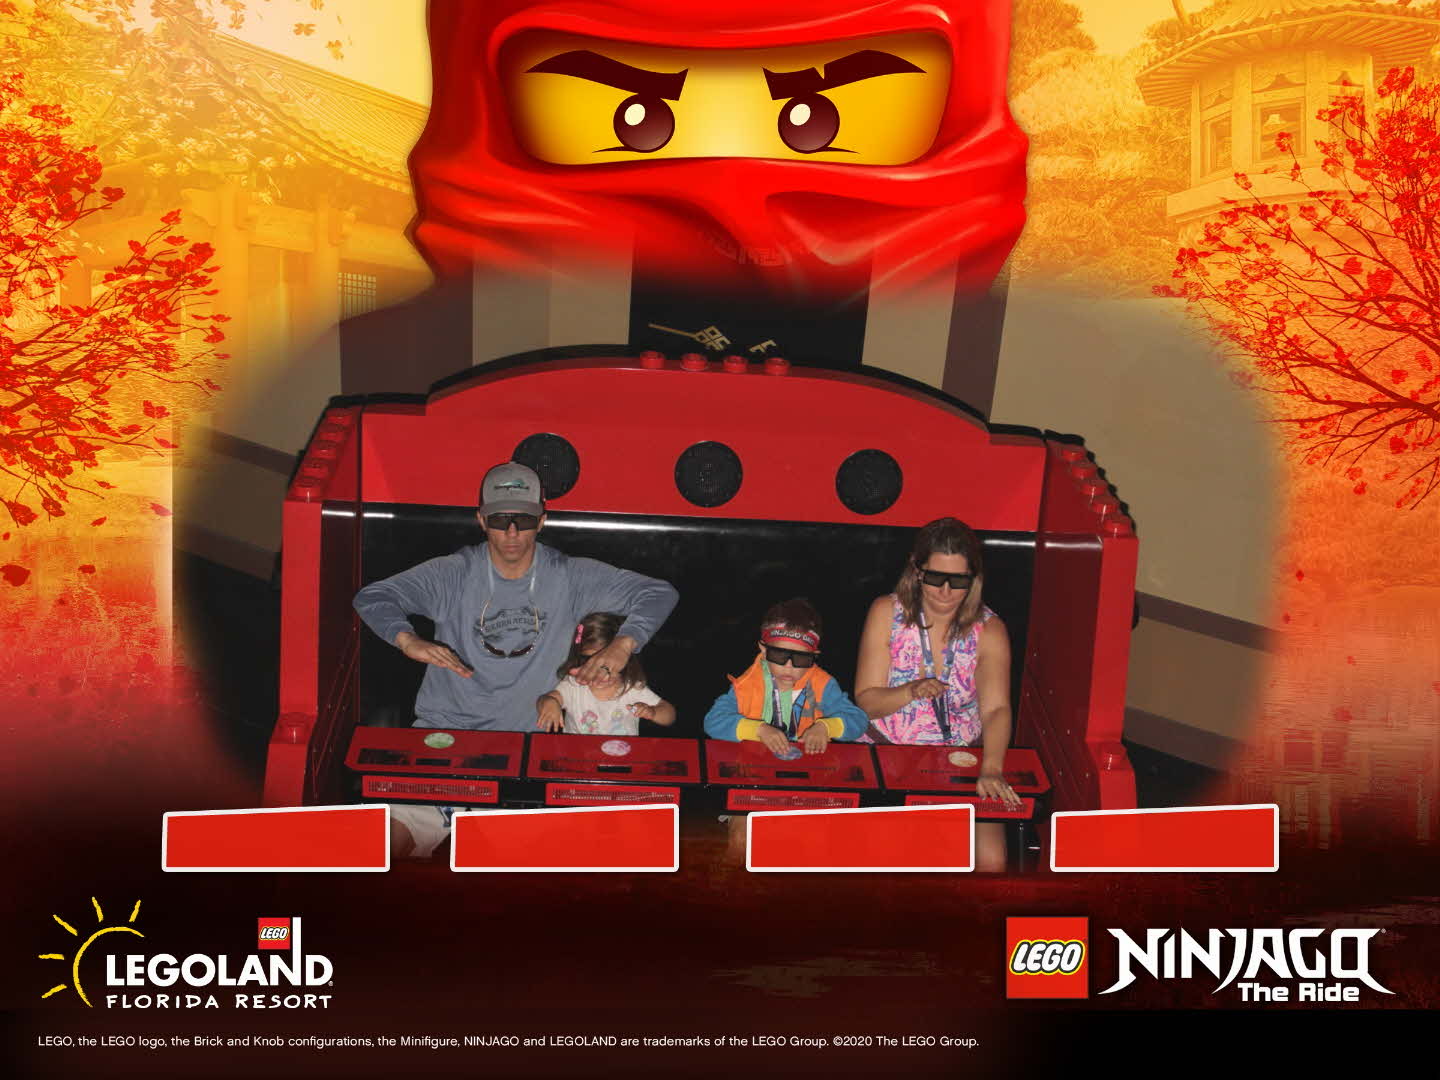 Family of four on a ride with LEGOLAND text on image.